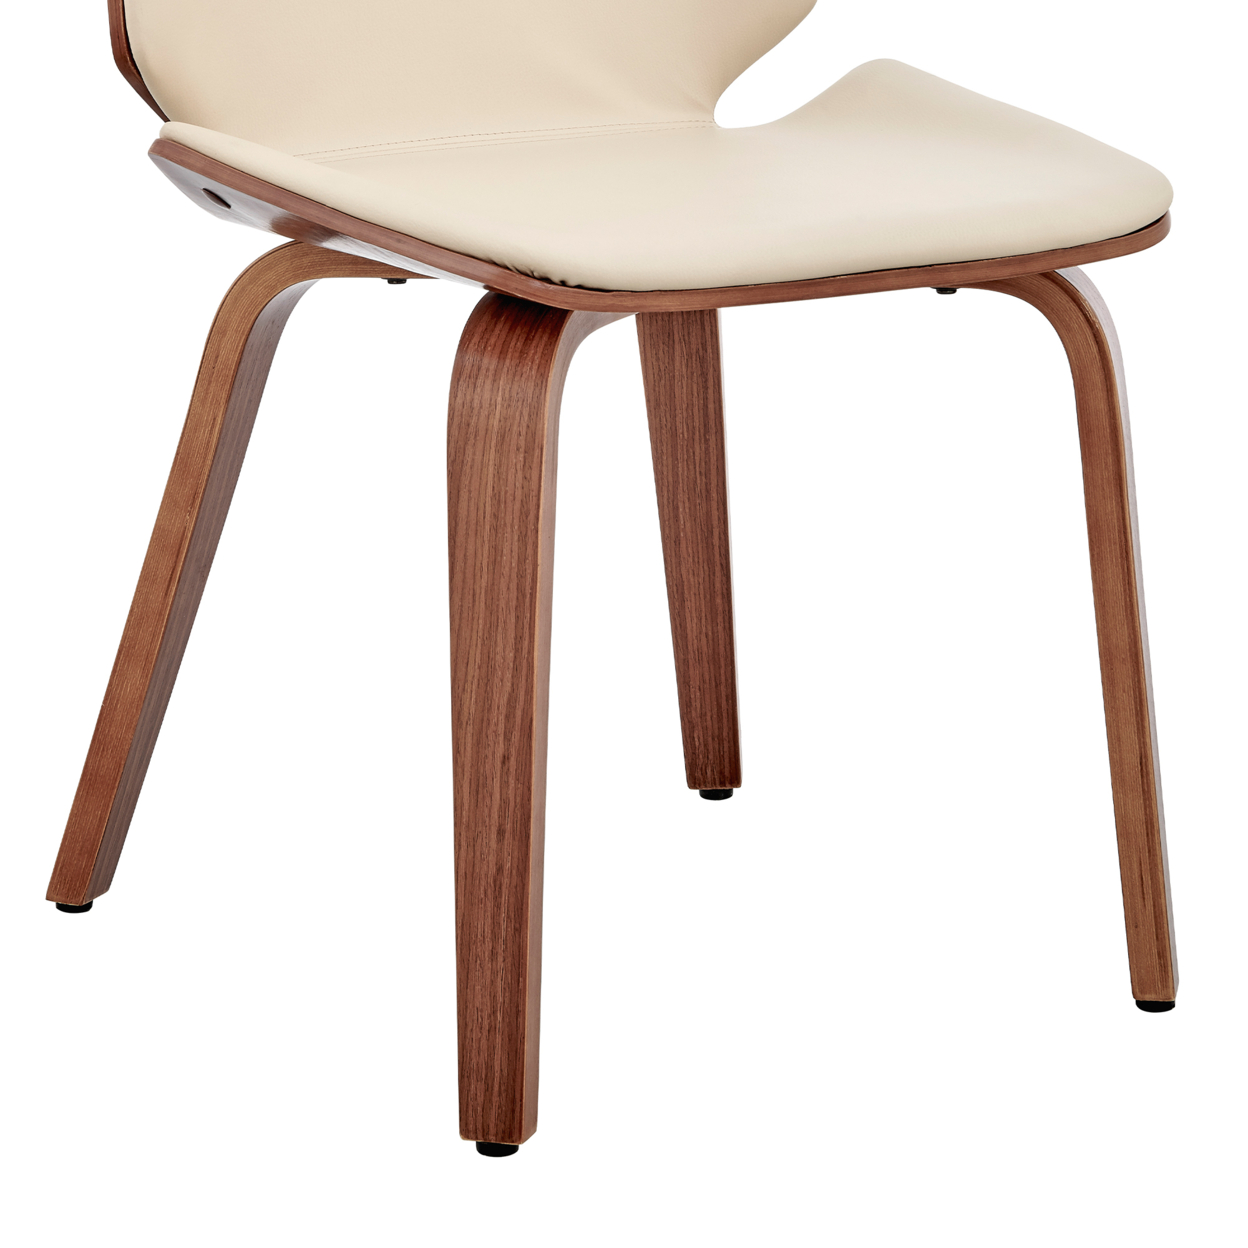 Leatherette Dining Chair With Slightly Curved Seat, Cream- Saltoro Sherpi